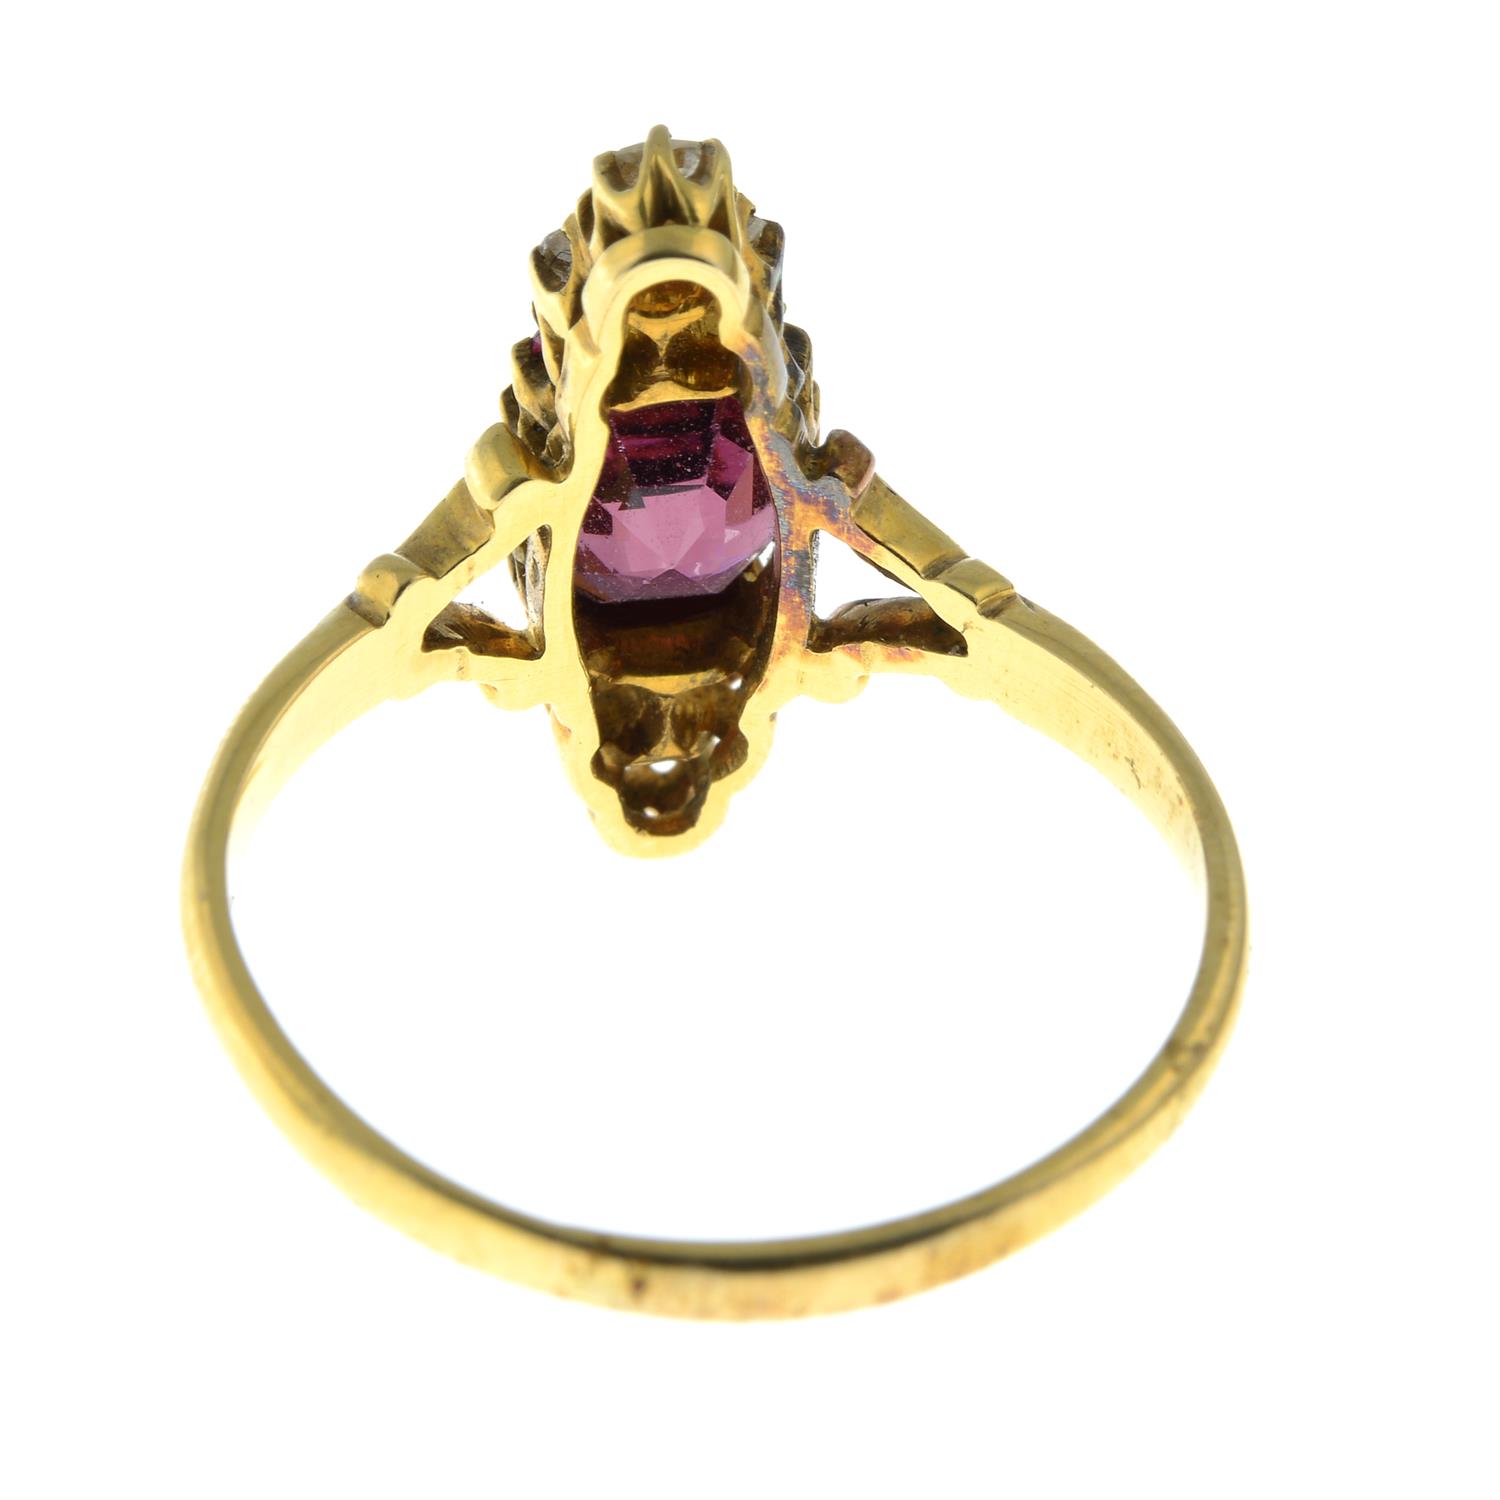 An early 20th century 18ct gold garnet and old-cut diamond ring. - Image 4 of 5